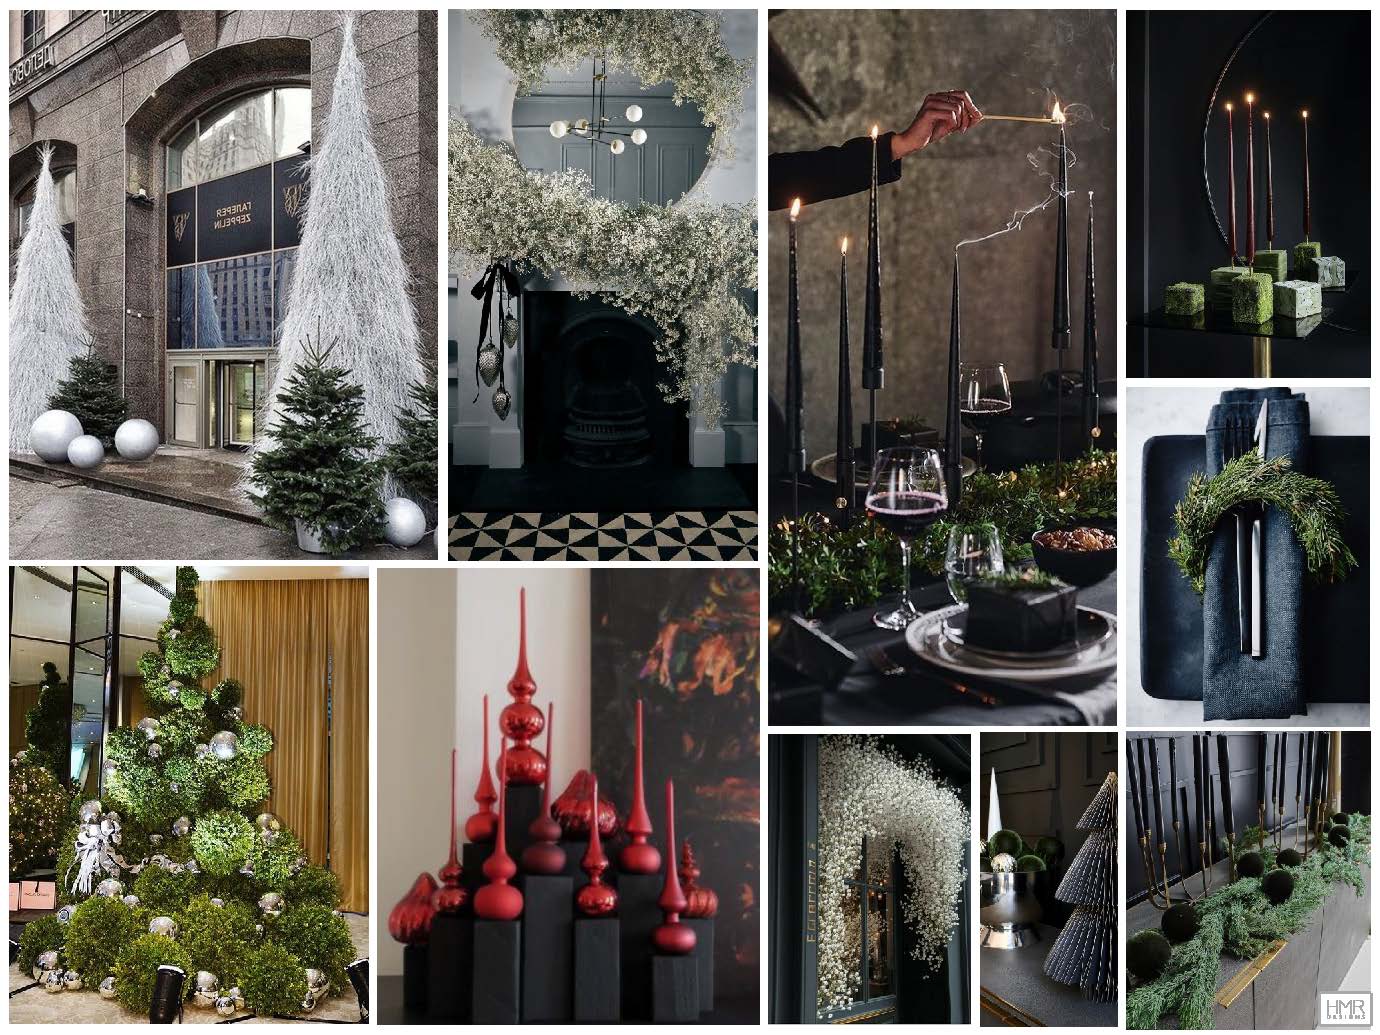 Collage of modern and simplistic holiday decor that focuses on greenery, metals, and texture.